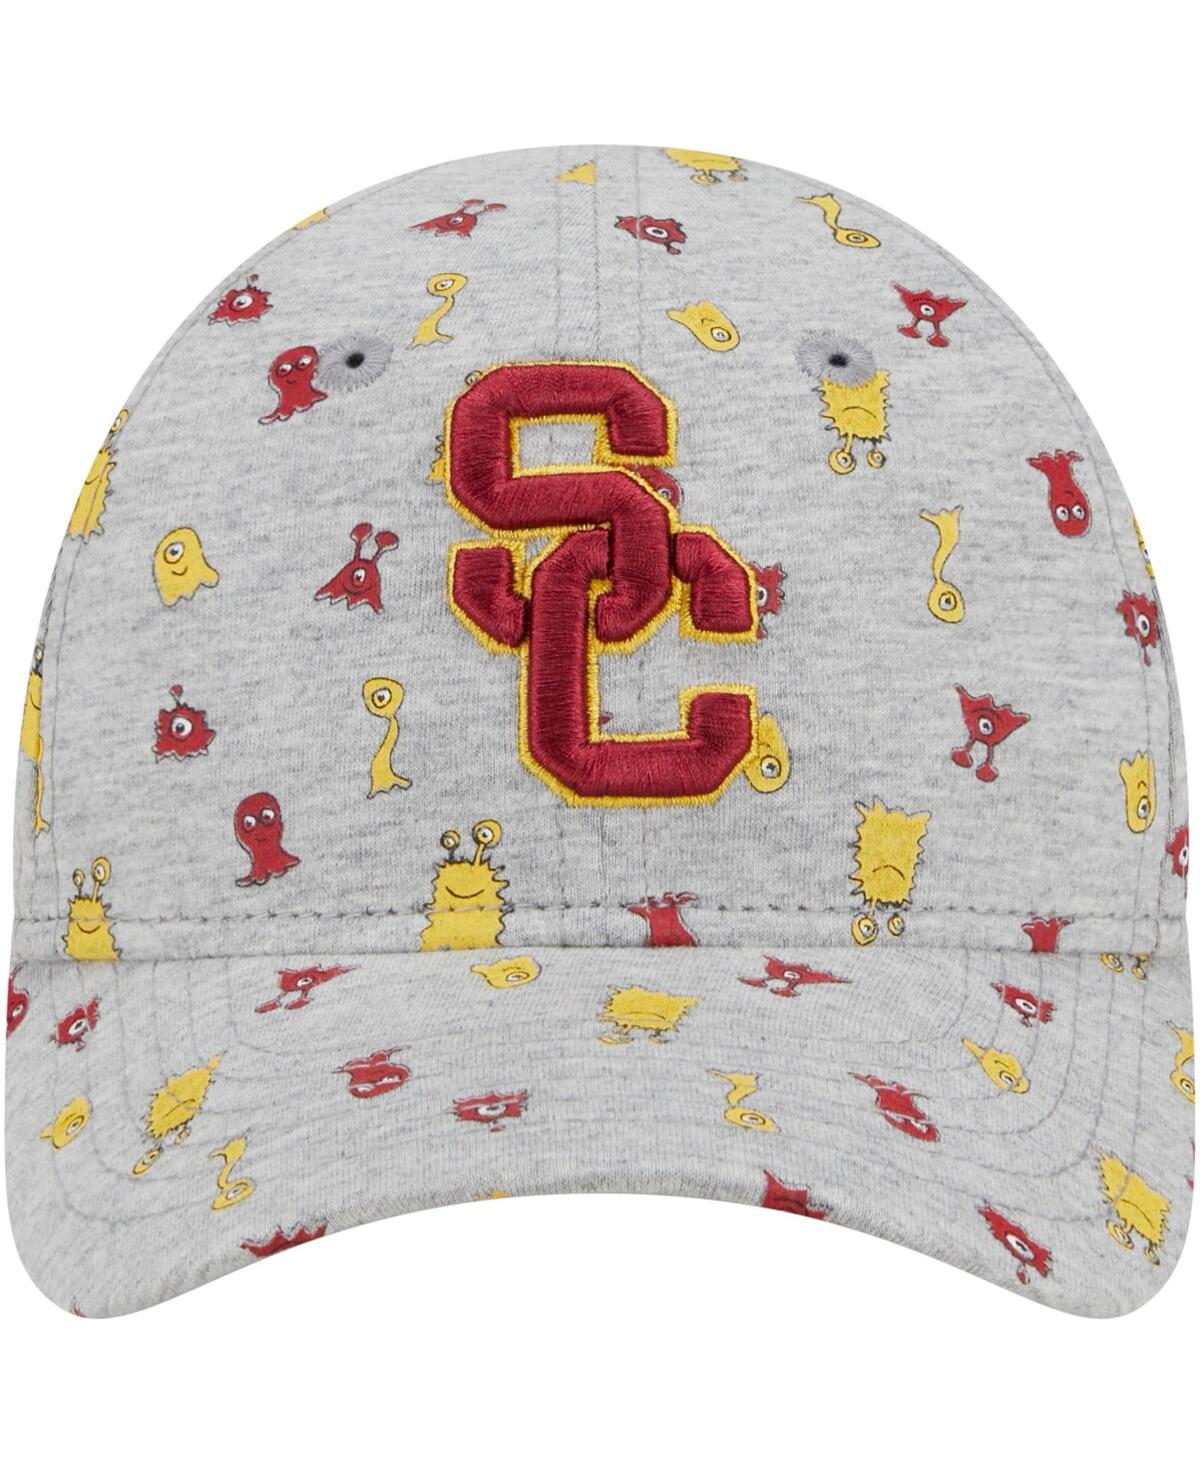 Shop New Era Toddler Boys And Girls  Heather Gray Usc Trojans Allover Print Critter 9forty Flex Hat